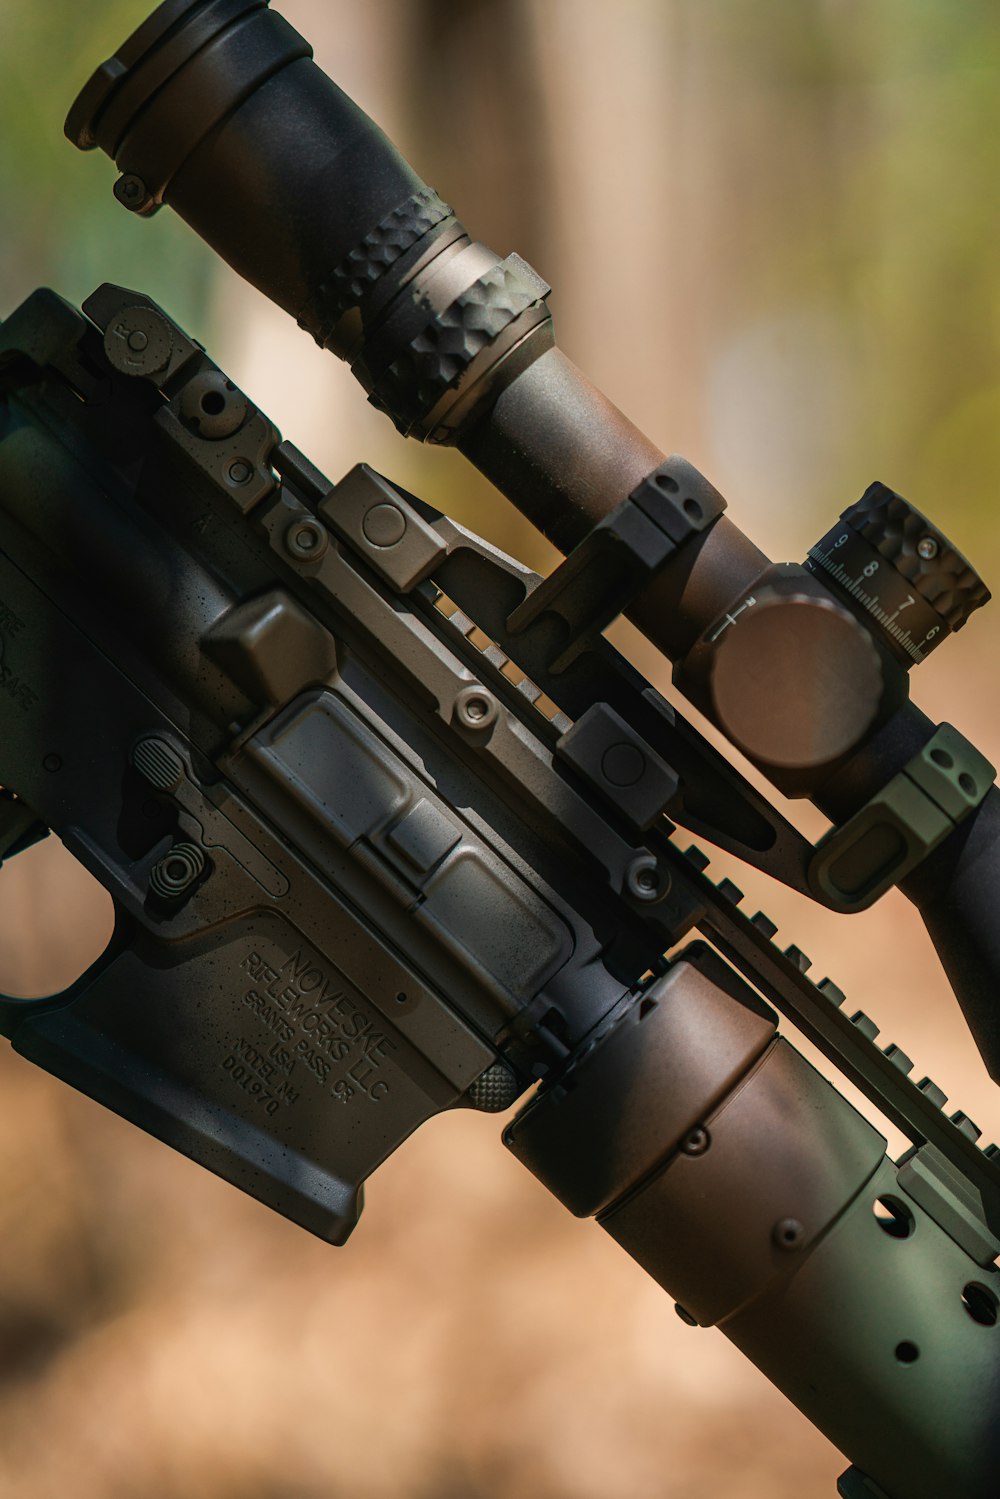 a close up of a rifle with a scope attached to it